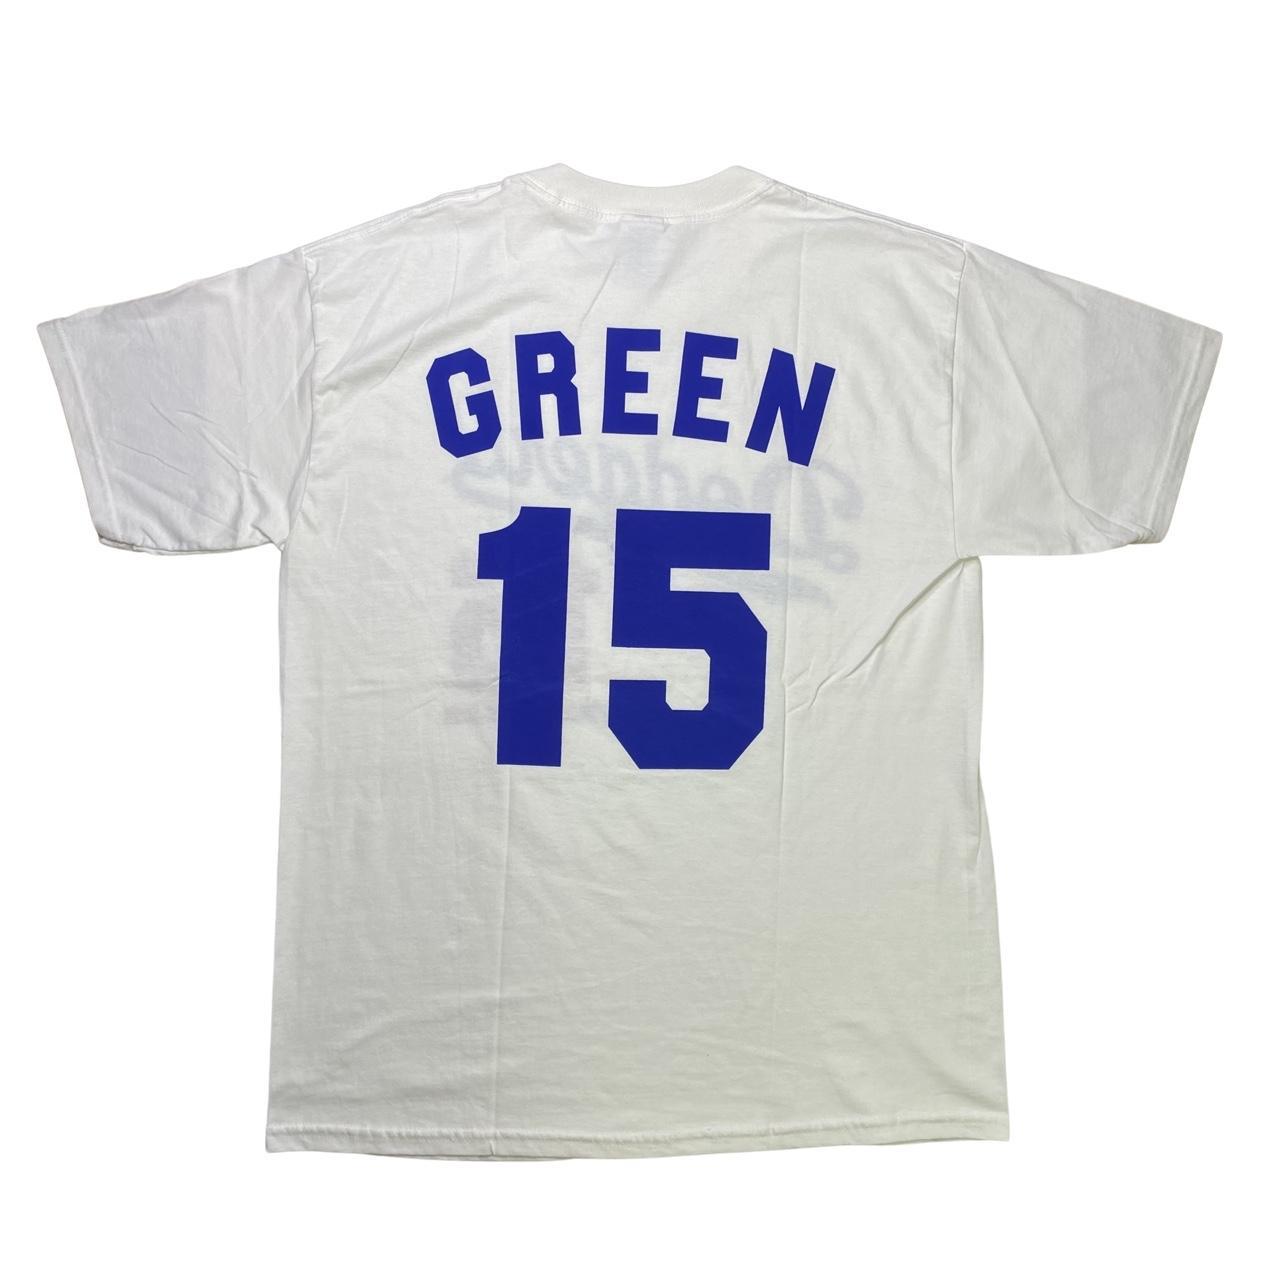 Vintage Early 2000s Los Angeles Dodgers Shawn Green Jersey for